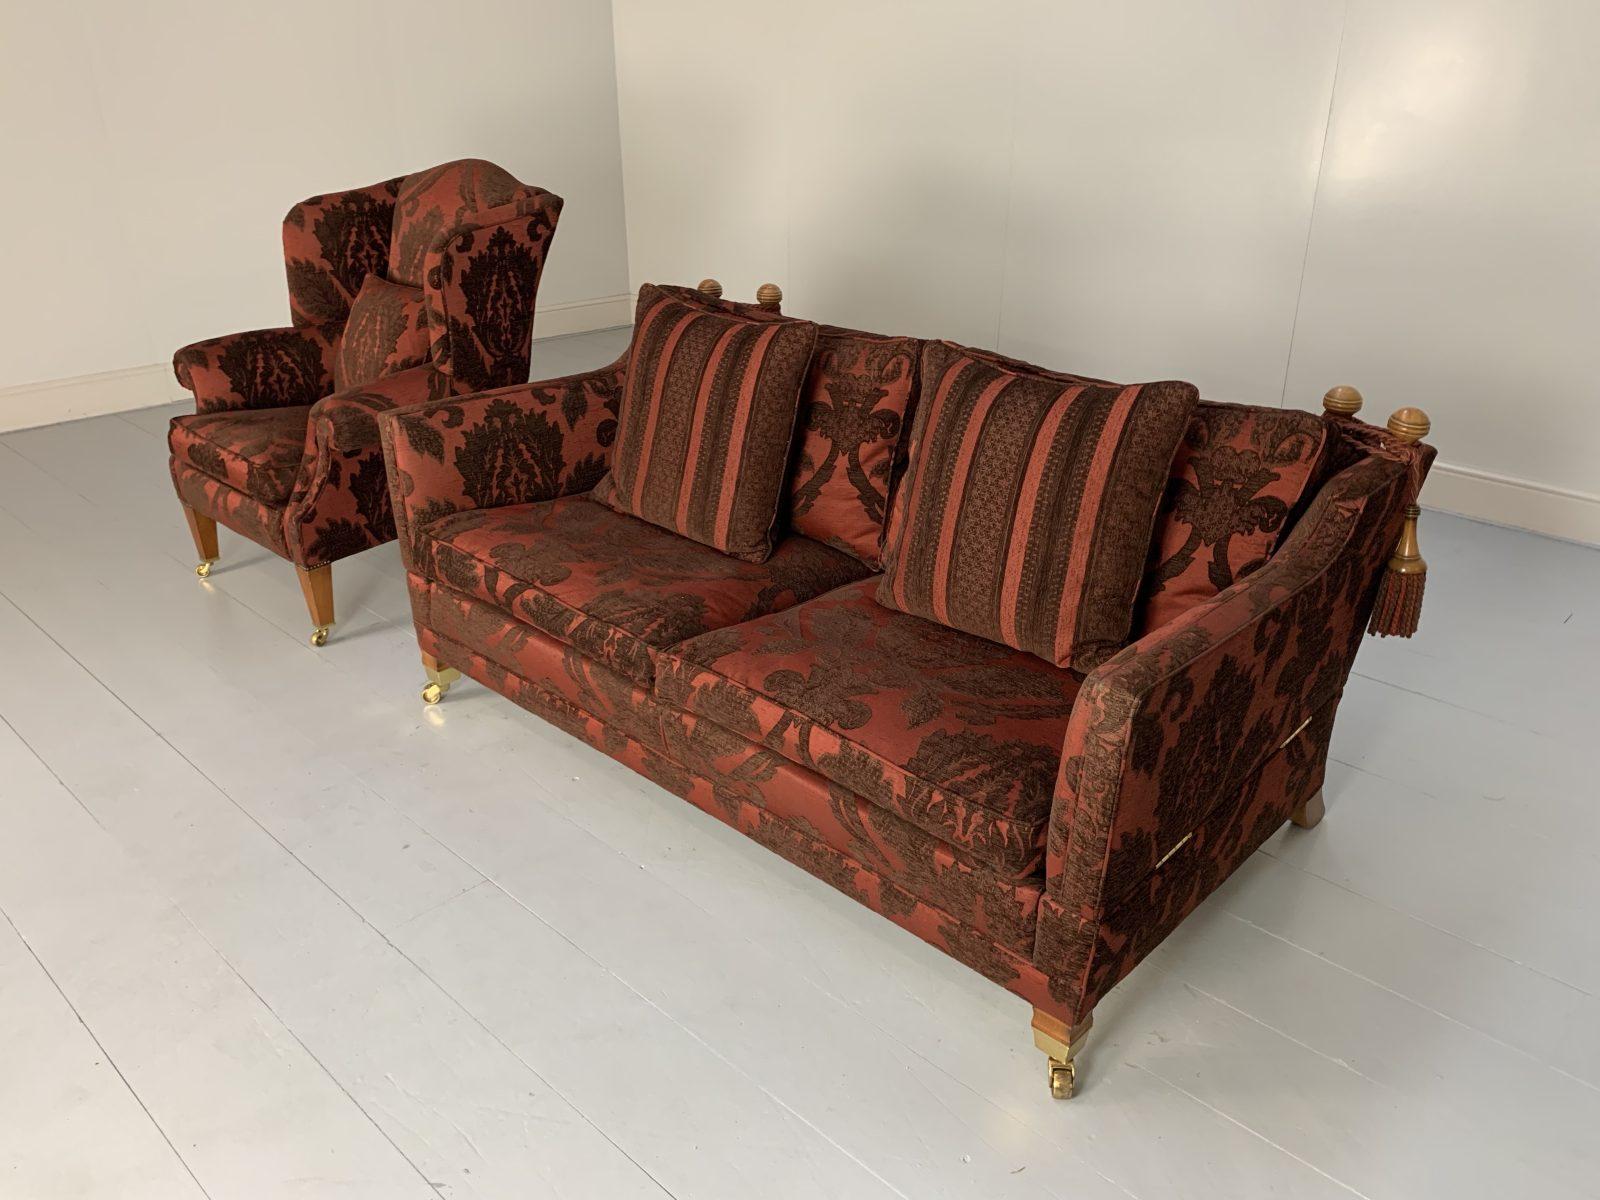 Hello Friends, and welcome to another unmissable offering from Lord Browns Furniture, the UK’s premier resource for fine Sofas and Chairs.

On offer on this occasion is a superb, majestic Duresta “Trafalgar” cushion-back 2.5-seat sofa and